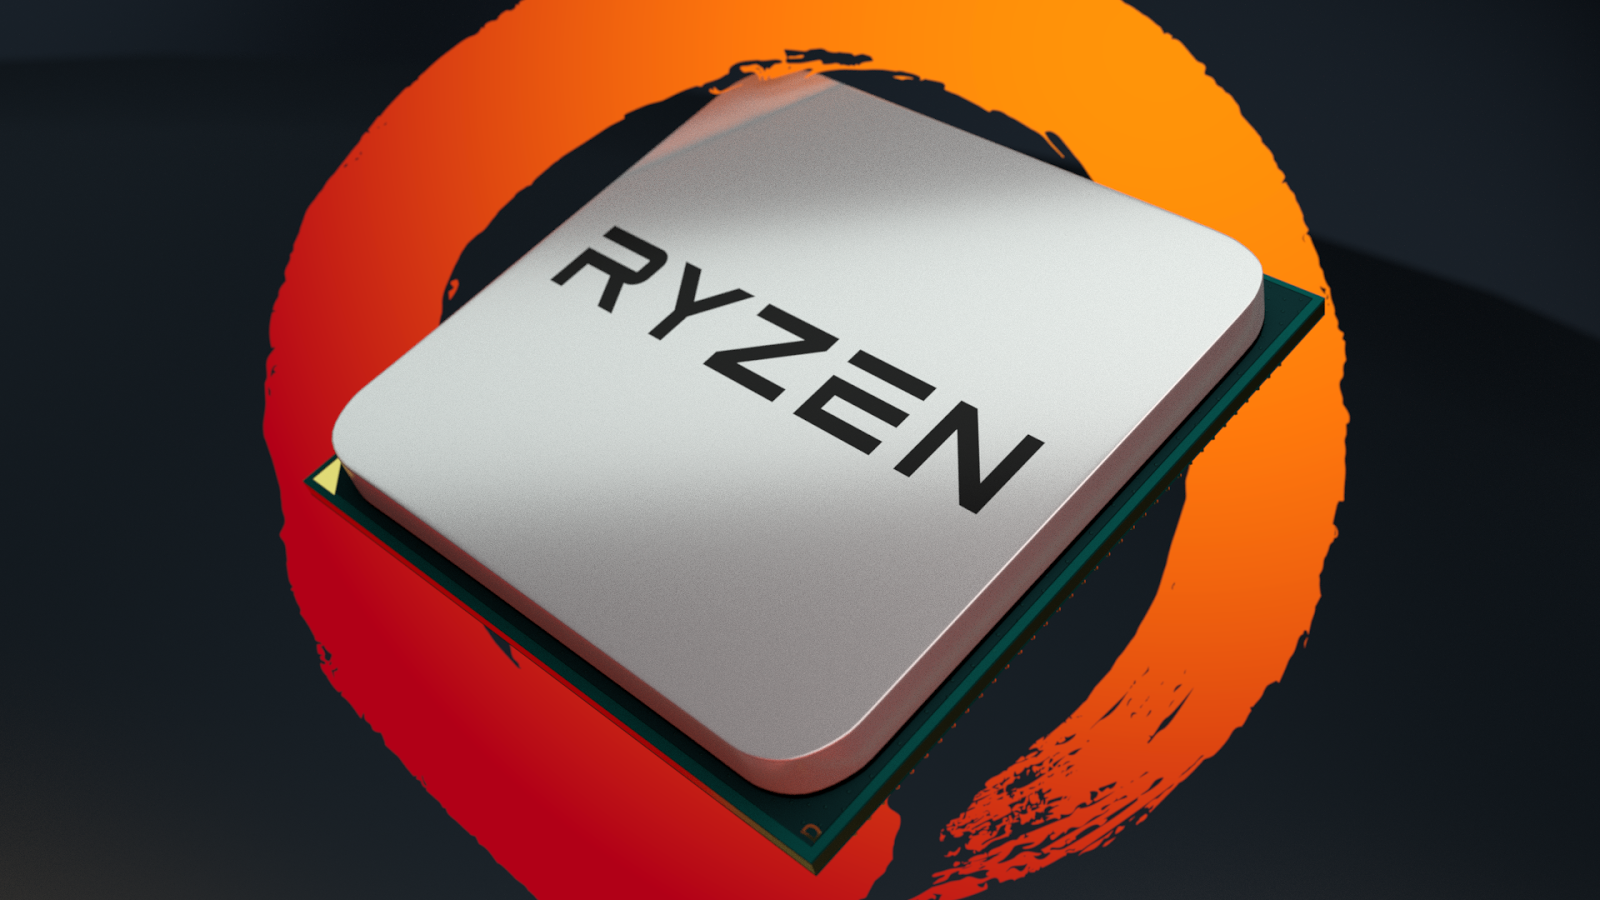 AMD Ryzen 5 CPUs Releasing On April 11, Prices and Specifications